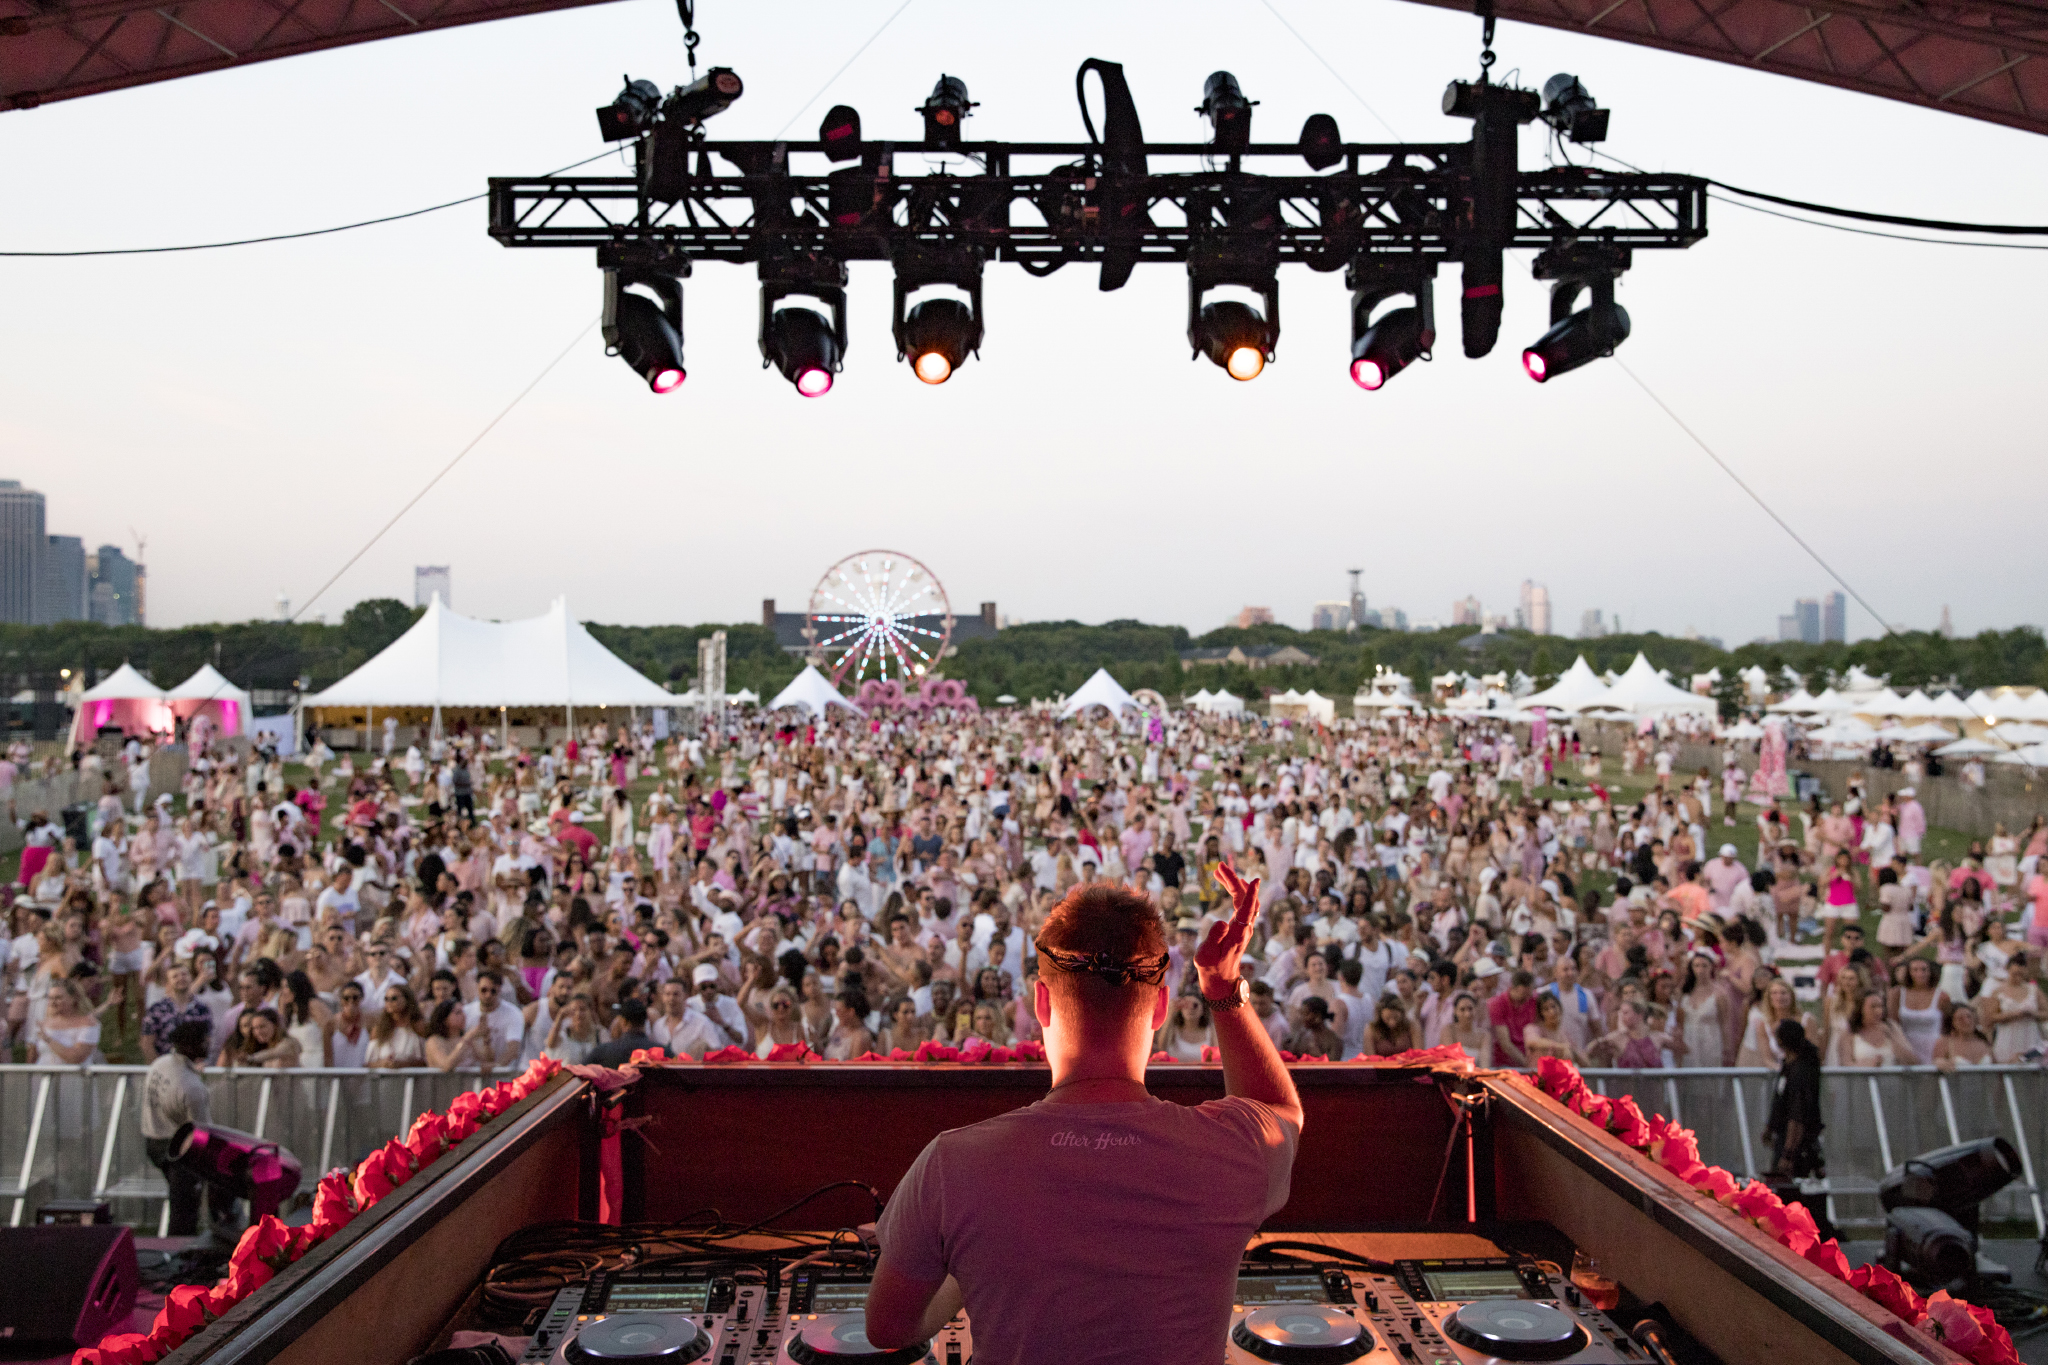 Pinknic NYC’s biggest summer picnic and music festival returns to Governors Island